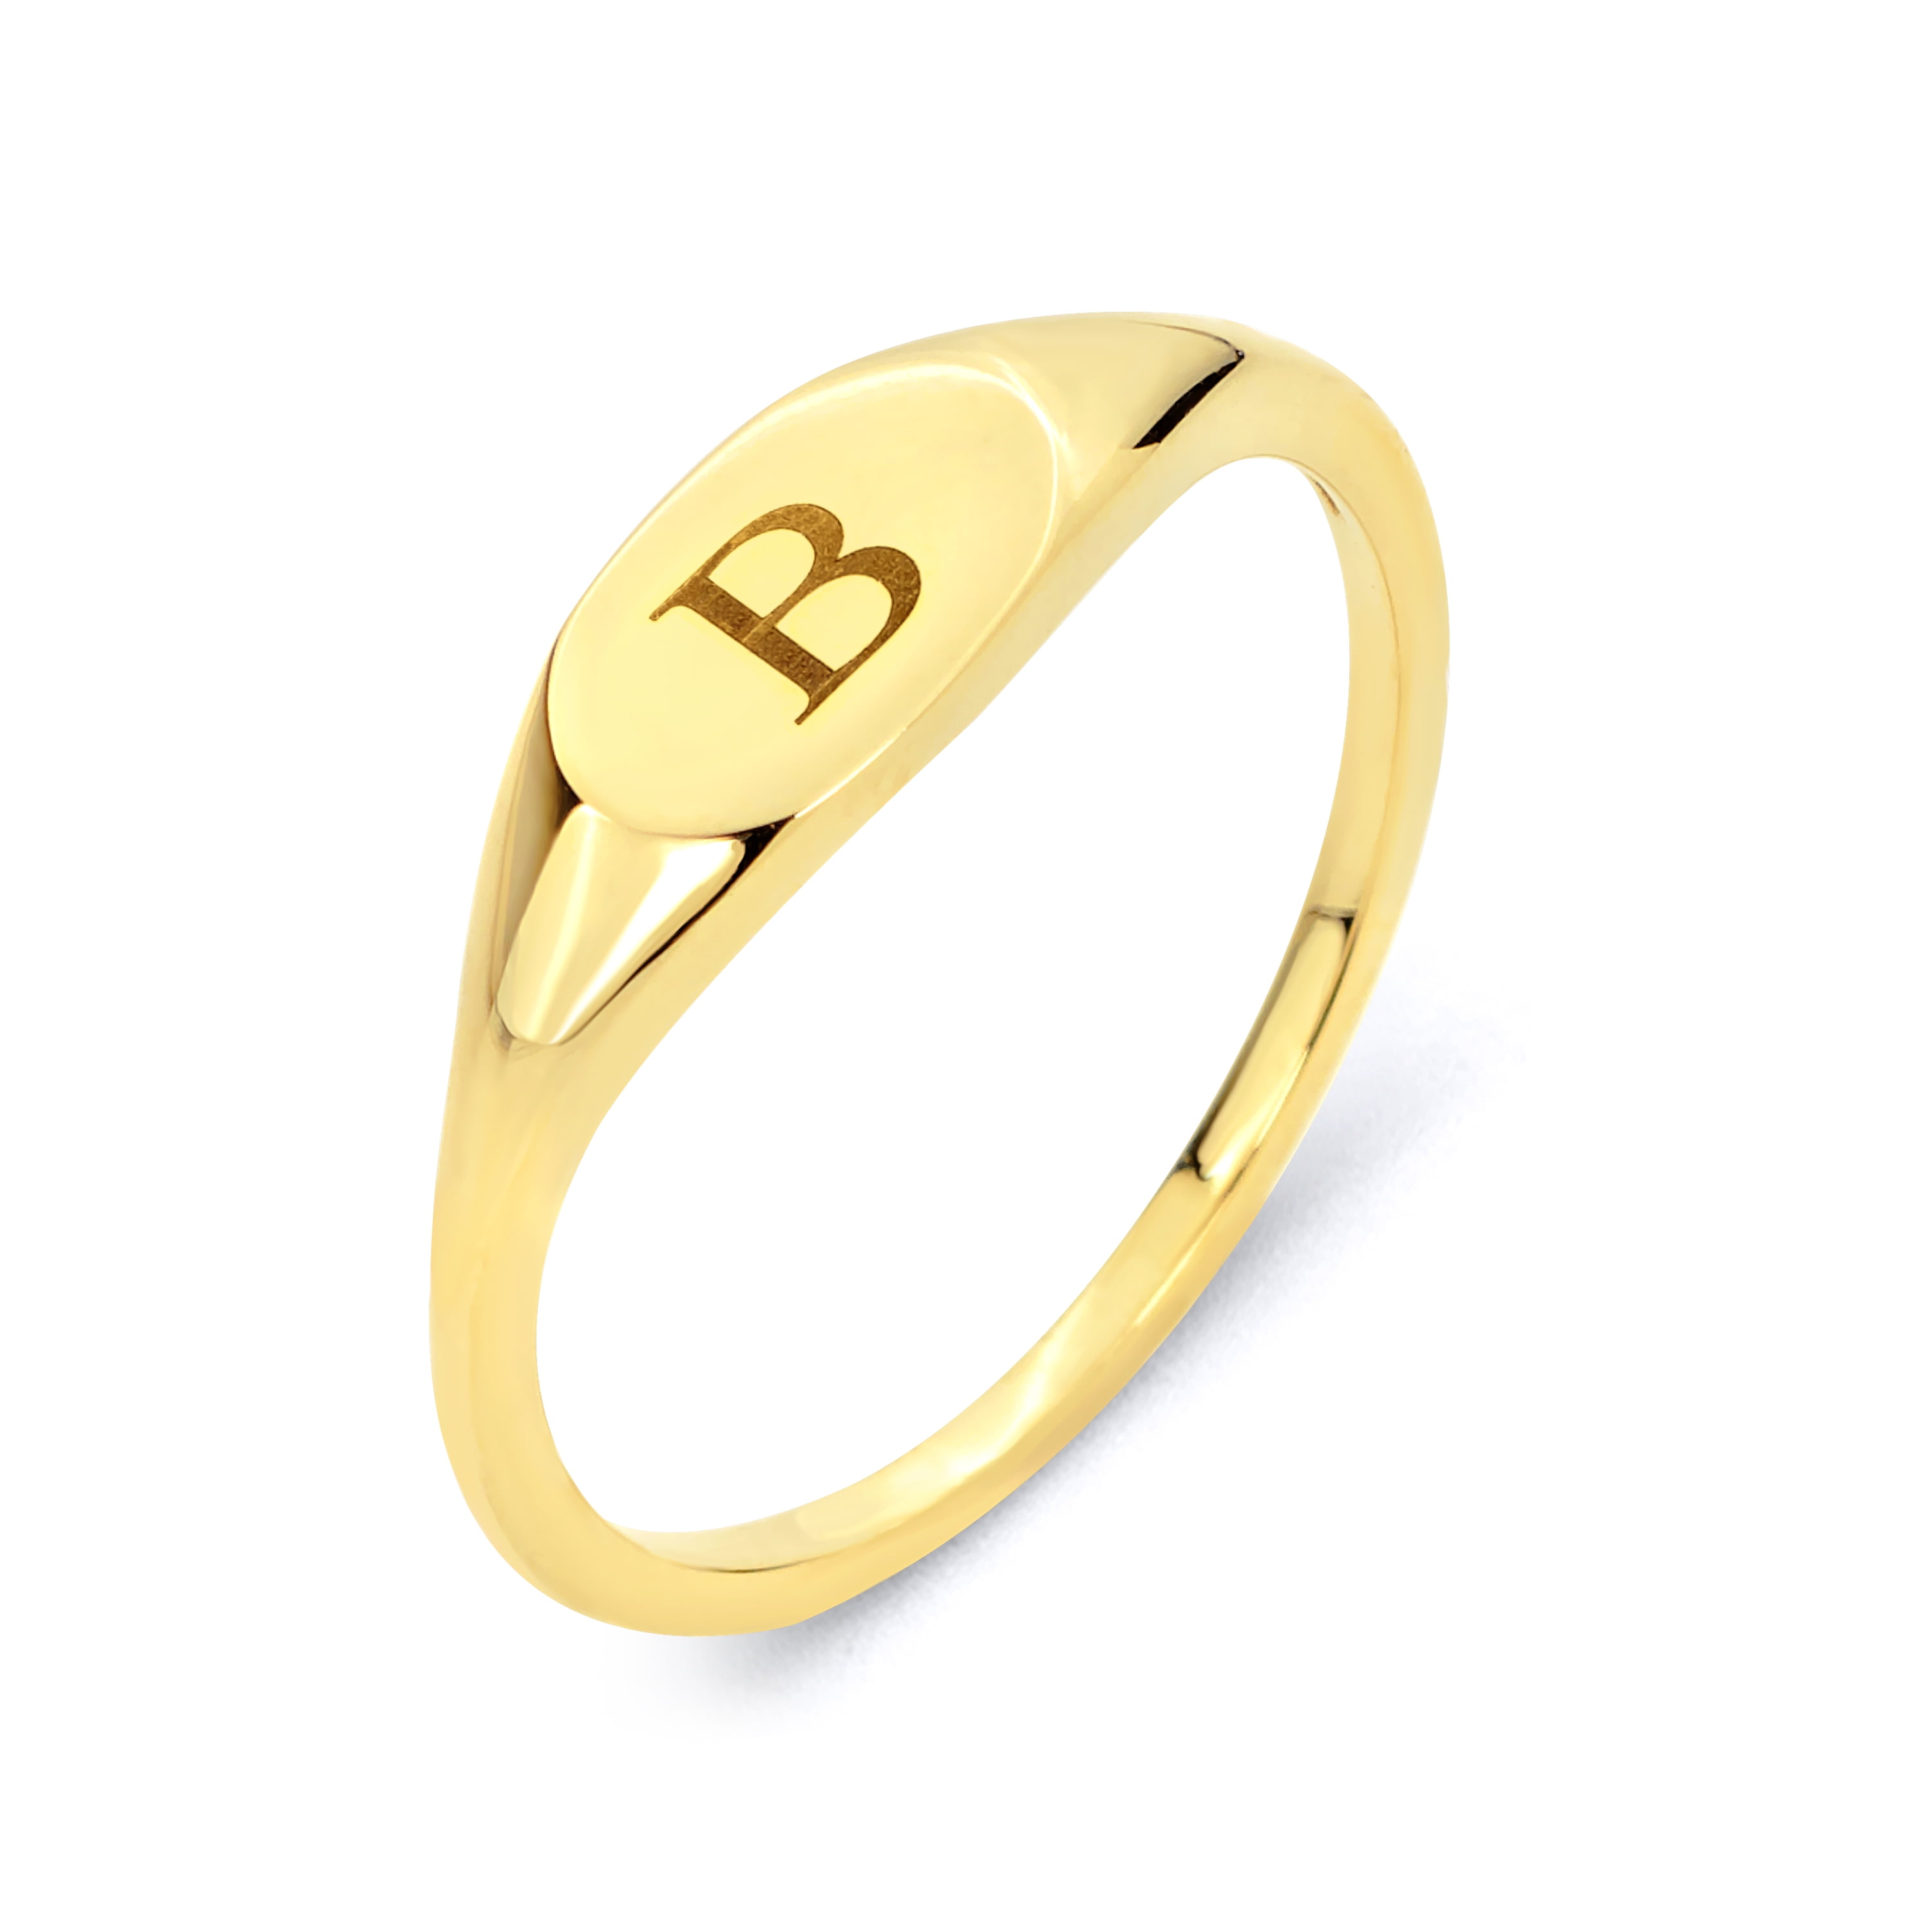 10K Real Yellow Gold Initial Ring for Baby Kids Boys Children 